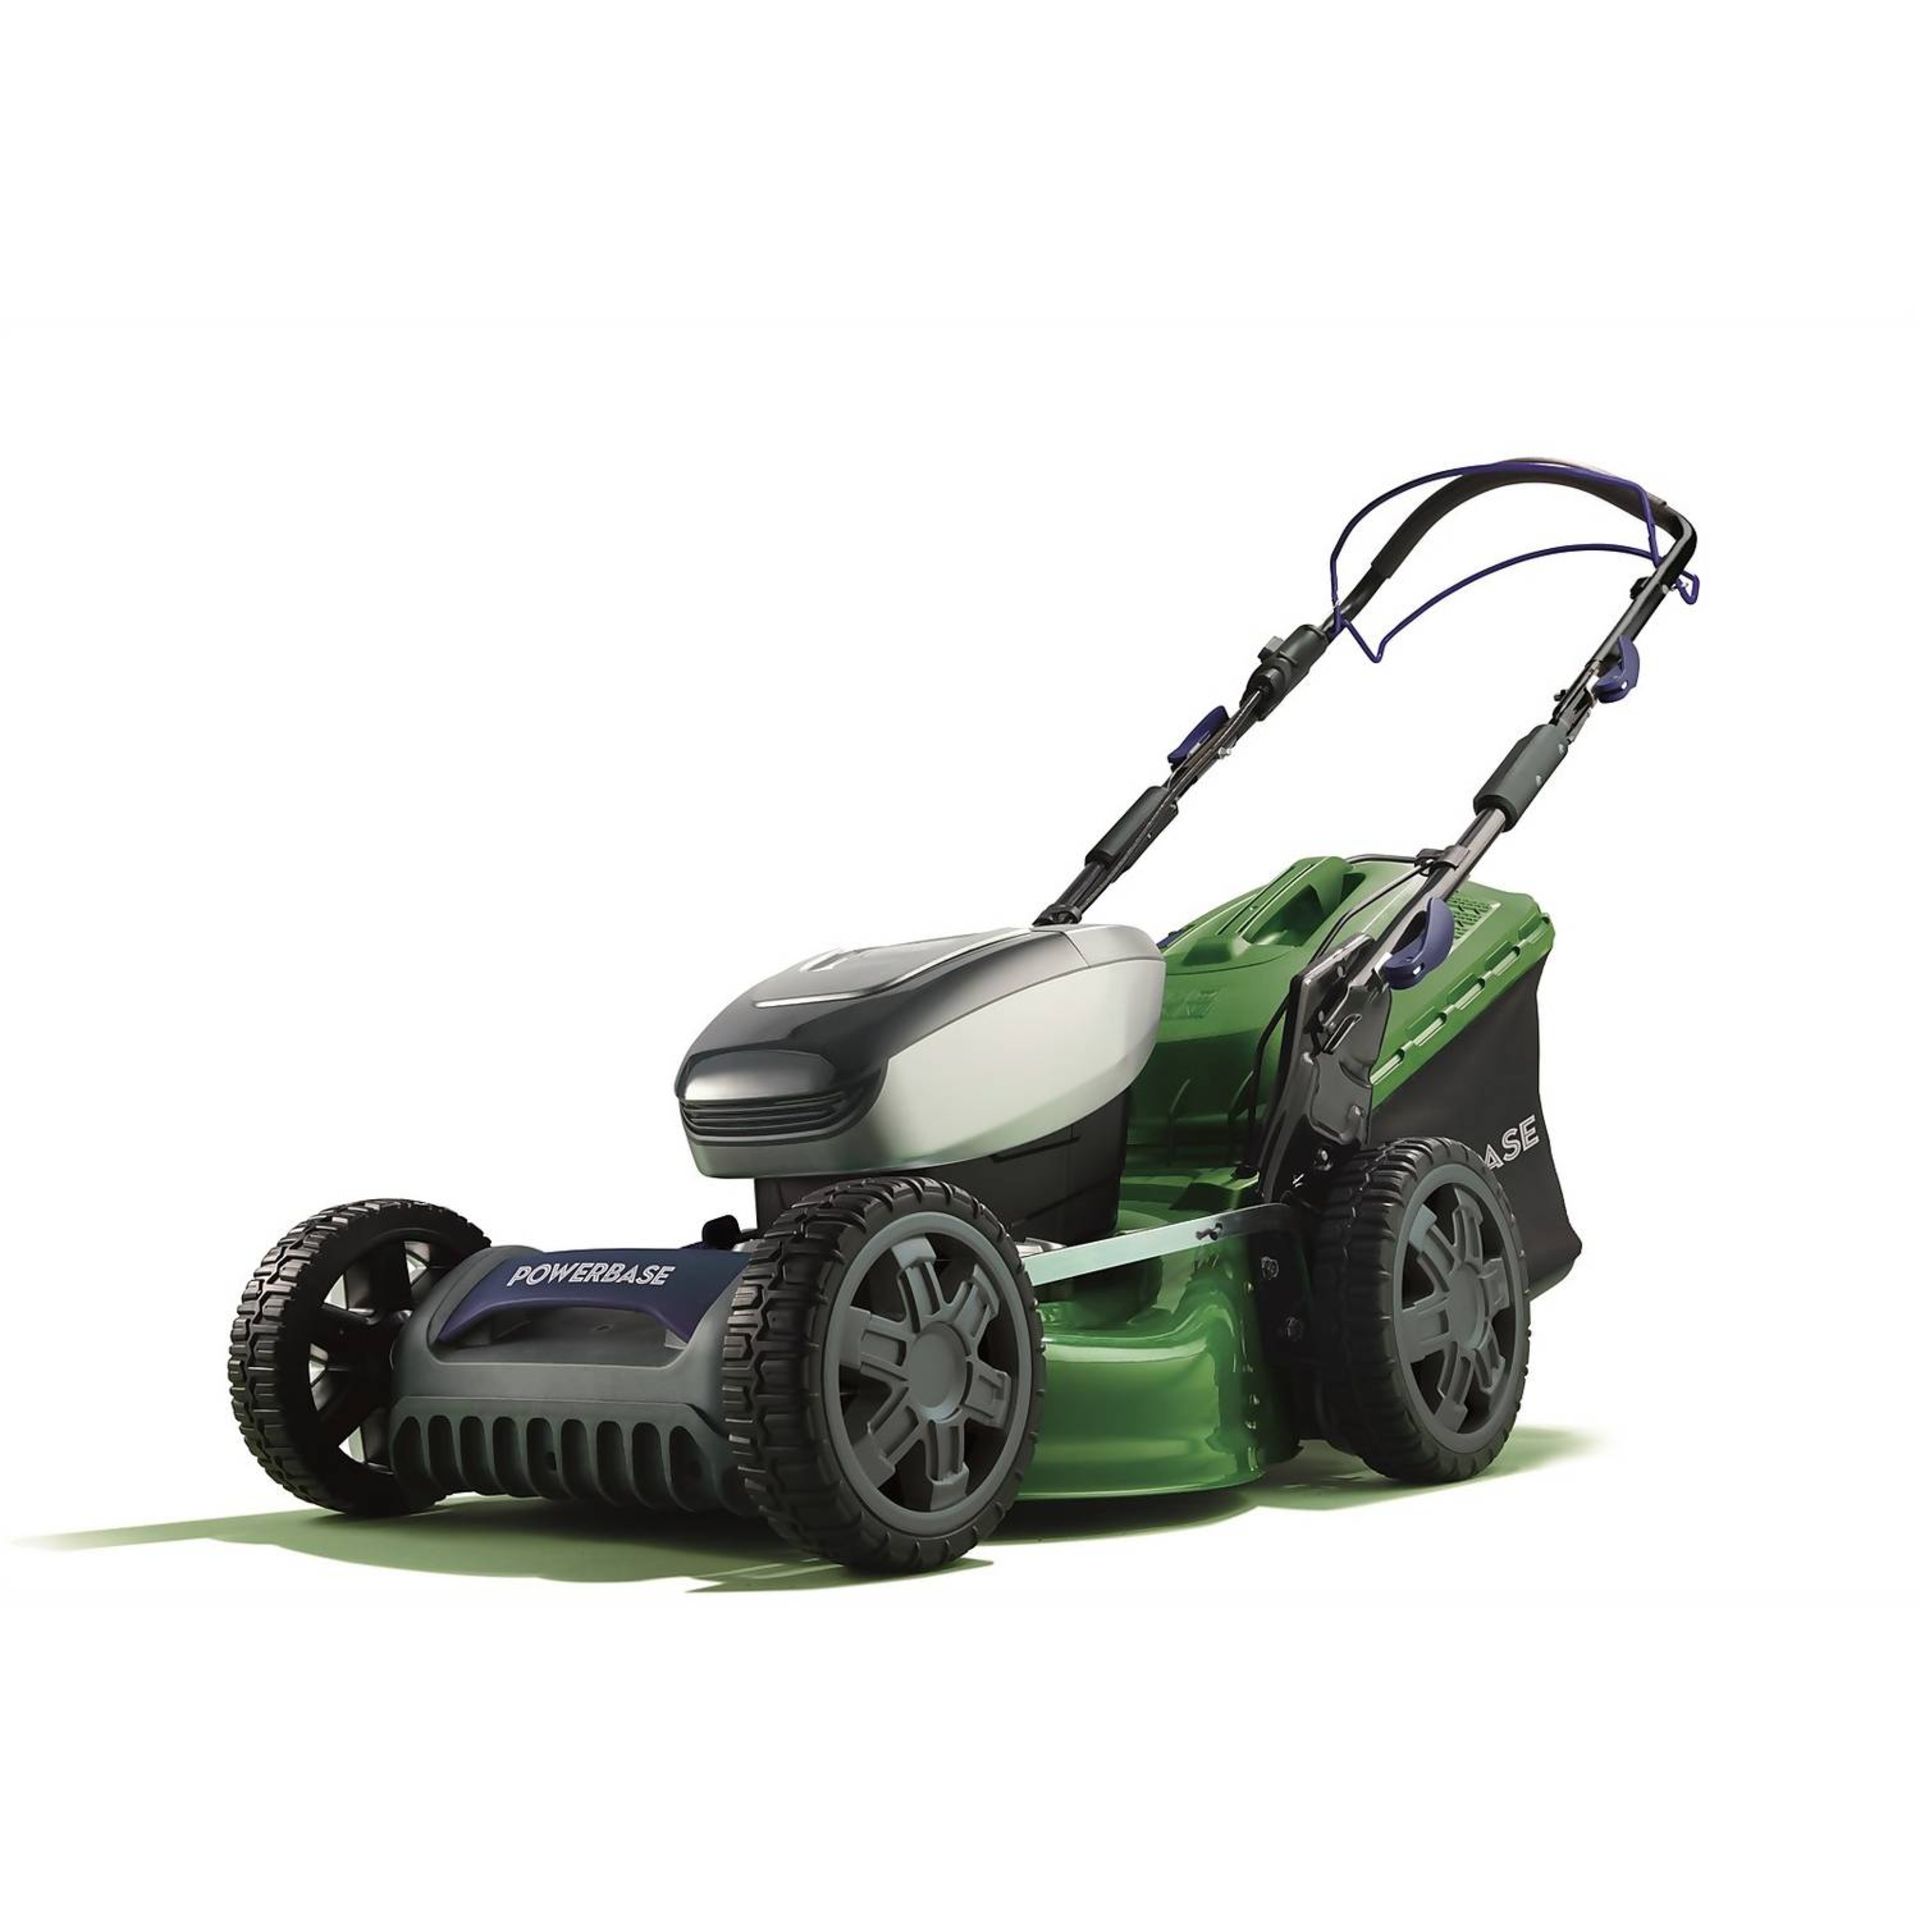 (7L) 1x Powerbase 46cm 40V Self Propelled Cordless Lawn Mower RRP £349. (With 2x Battery & 1x Dual